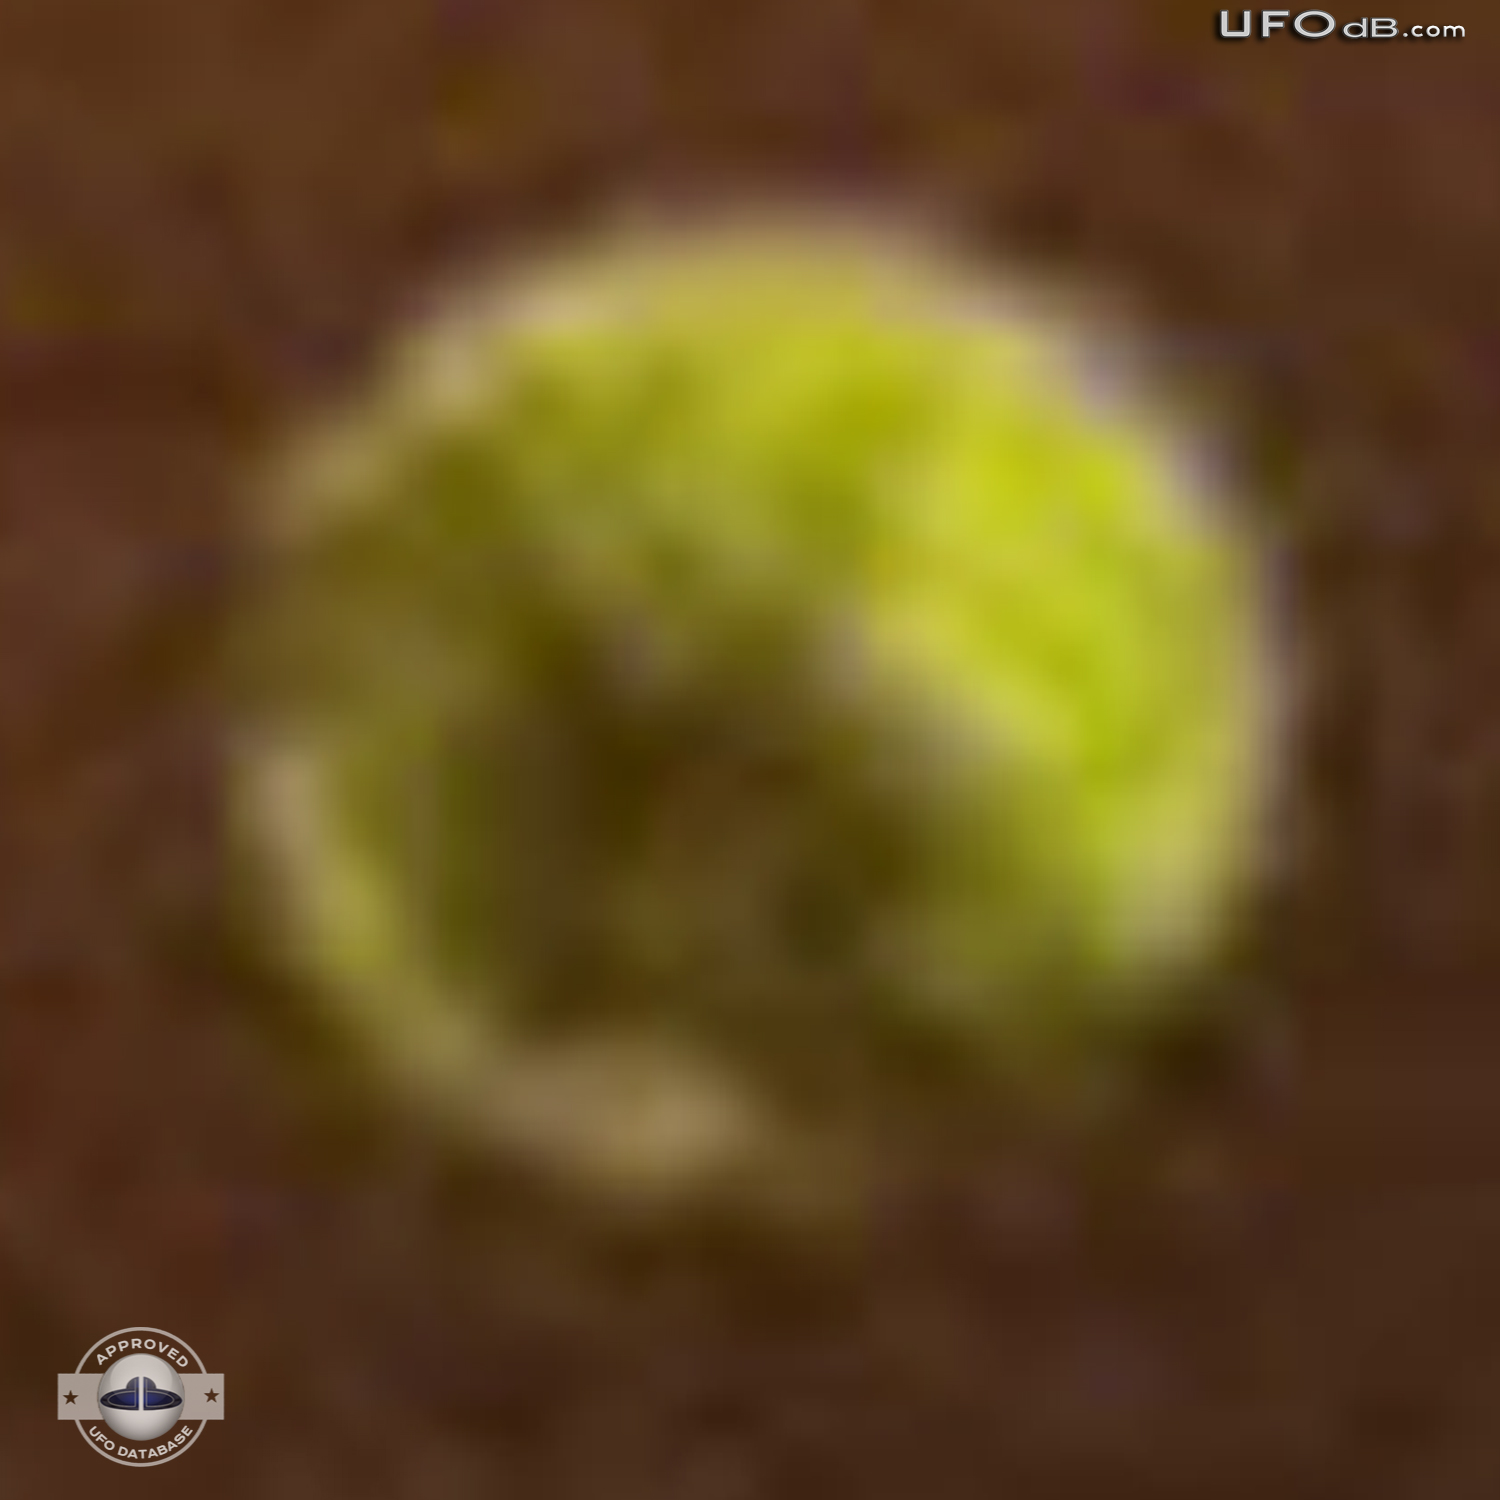 Green Sphere UFO caught on picture over the ocean | Miami Beach | 2011 UFO Picture #356-5